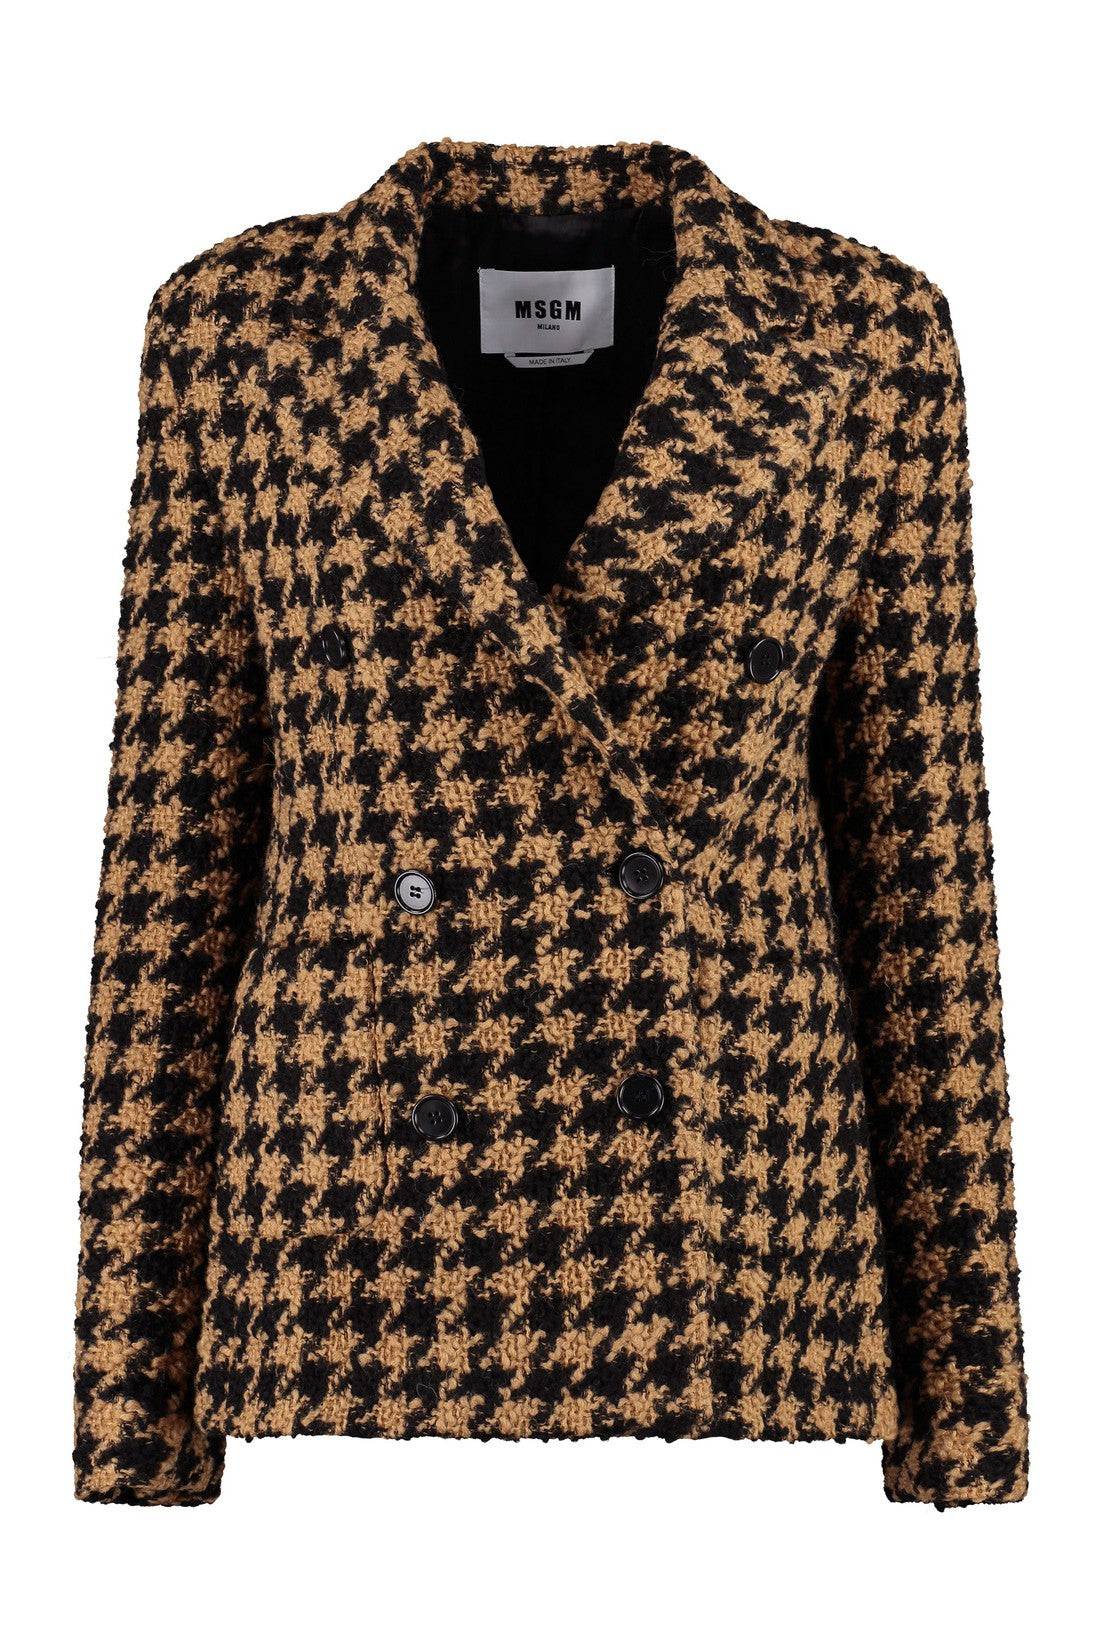 MSGM-OUTLET-SALE-Houndstooth double breast blazer-ARCHIVIST